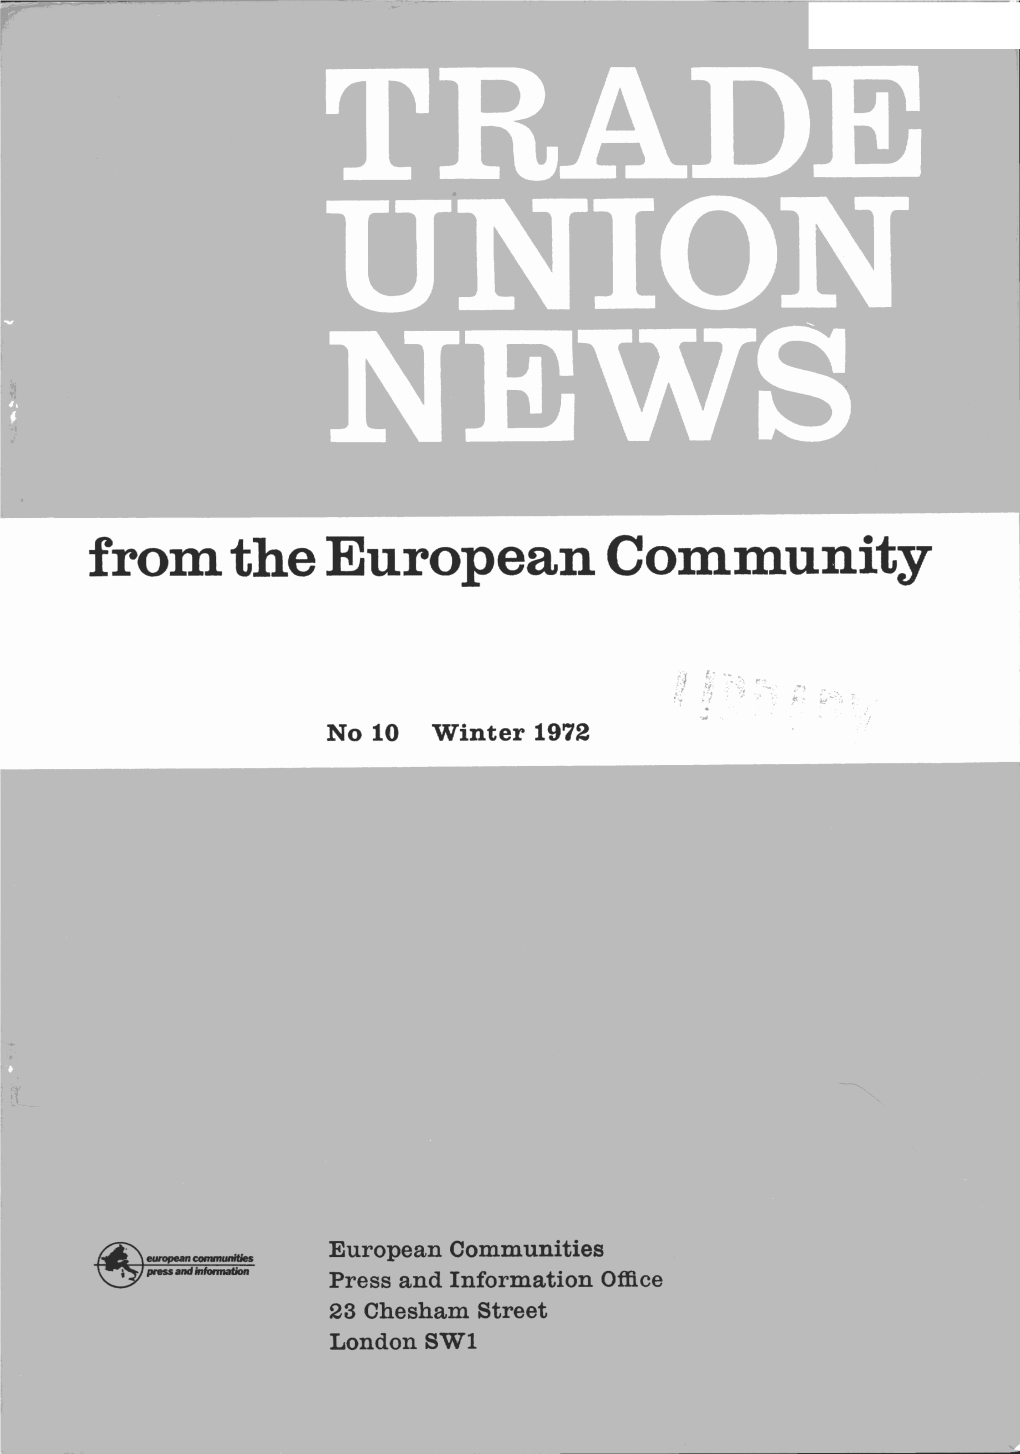 TRADE UNION NEWS from the European Community No 10 Winter 1972/73